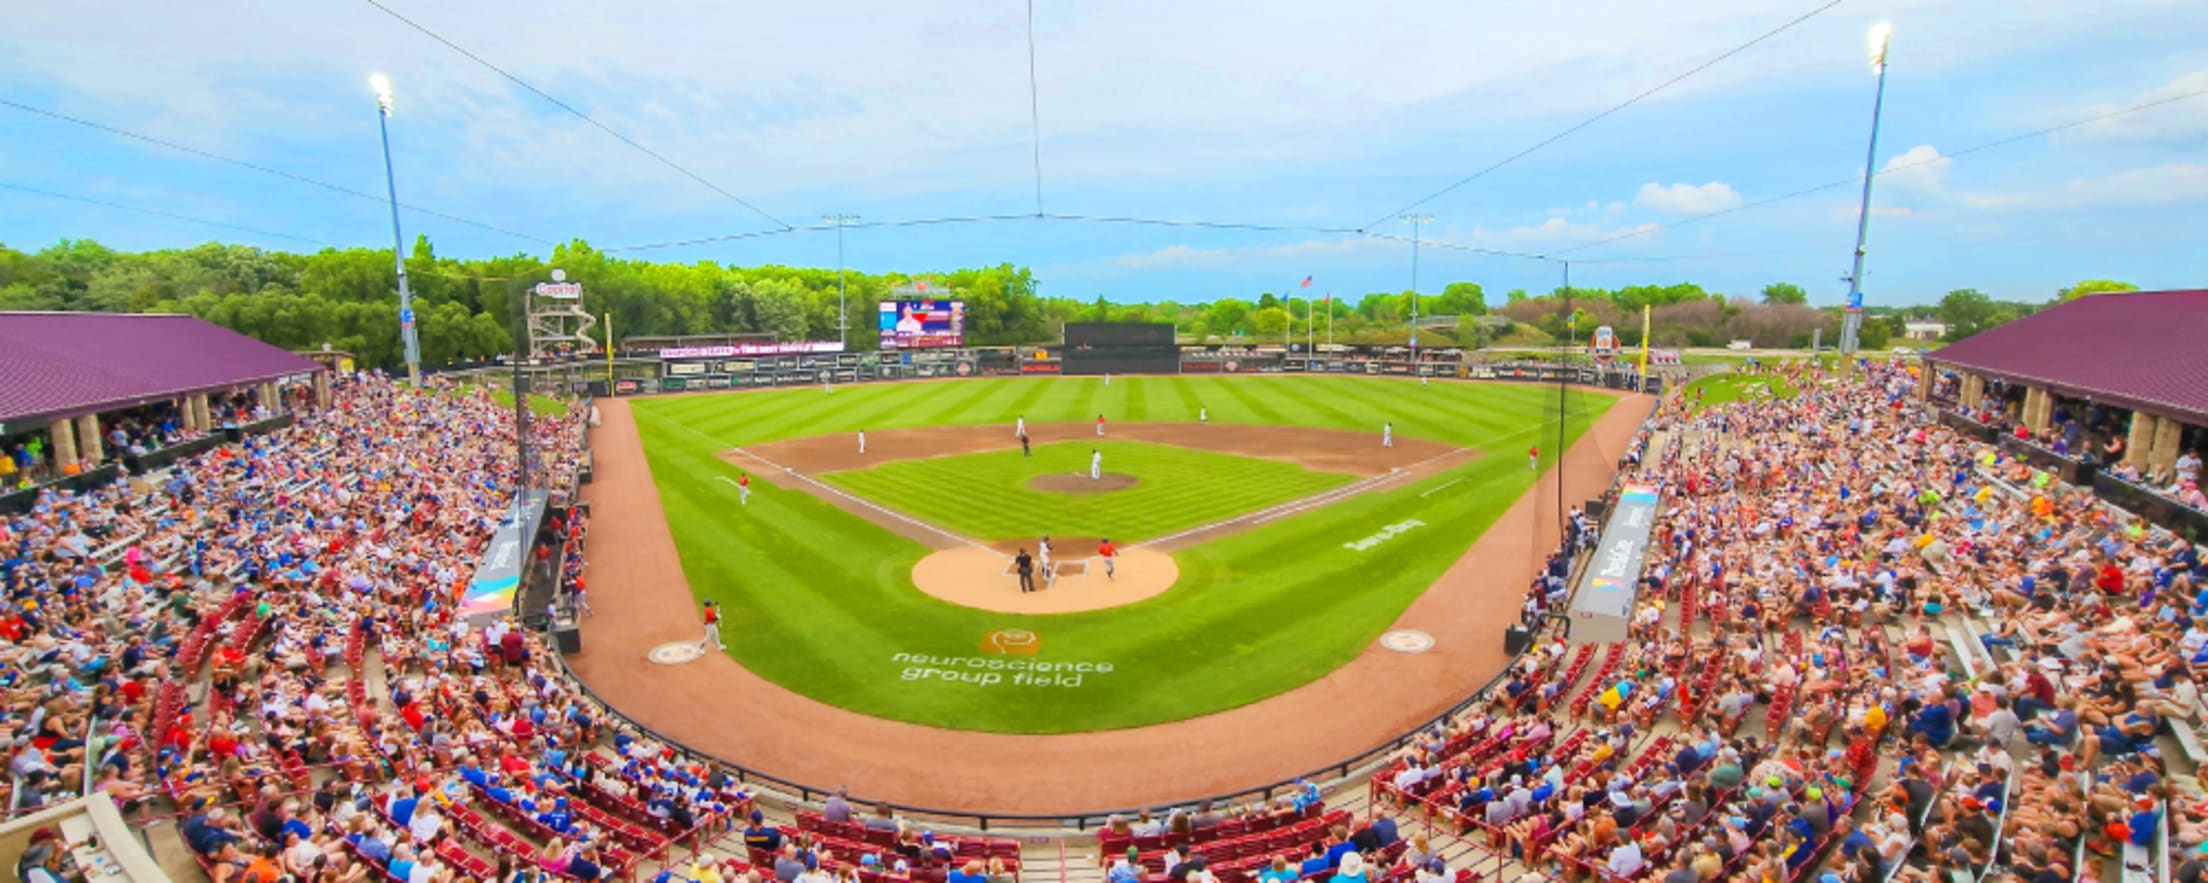 A game held at Neuroscience Group Field at Fox Cities Stadium in Grand Chute